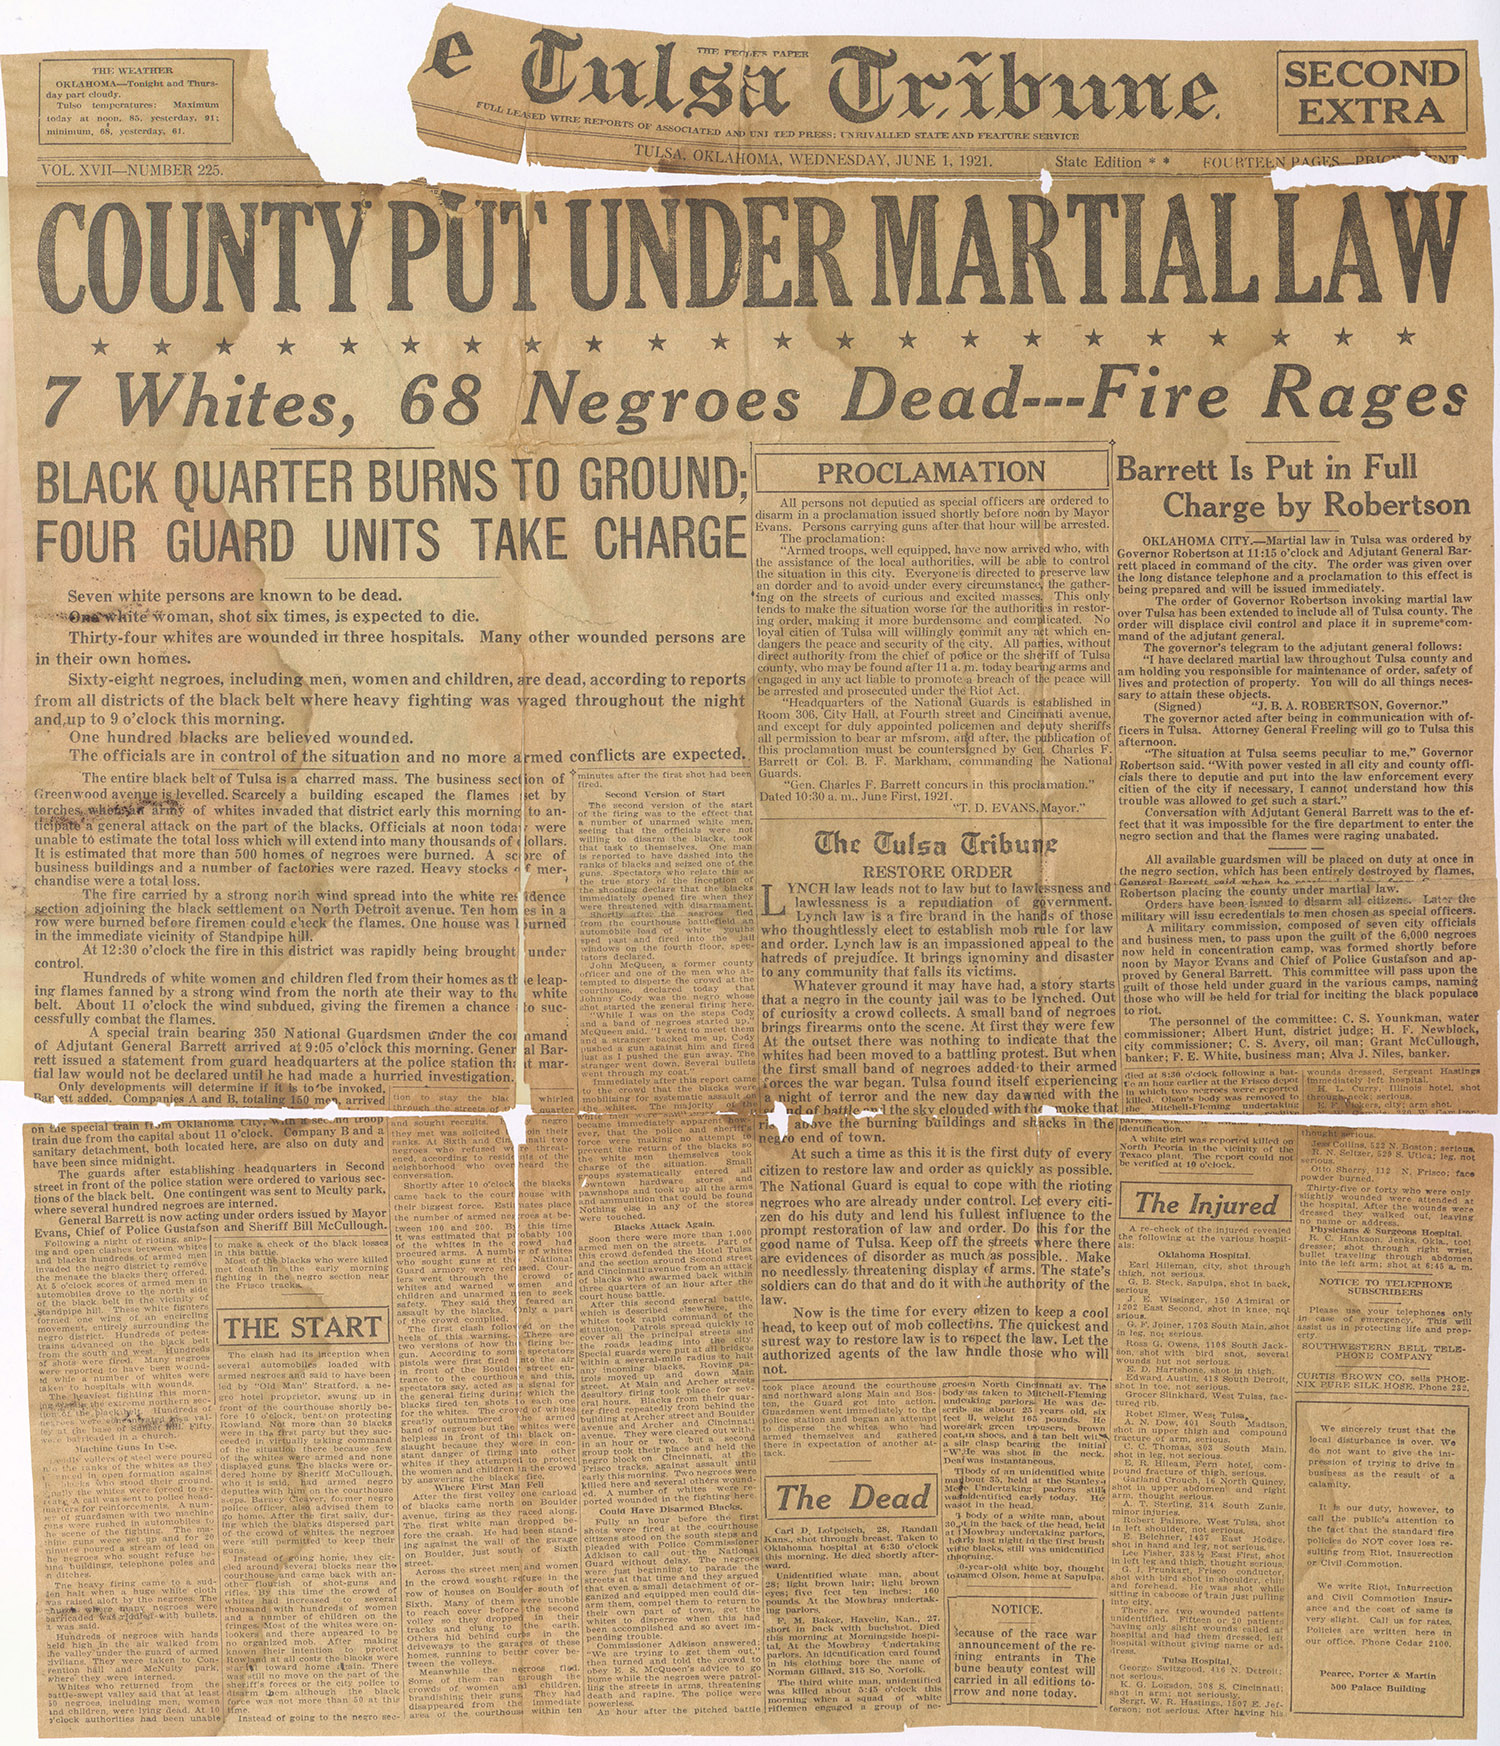 Front page of the Tulsa Tribune, June 1, 1921